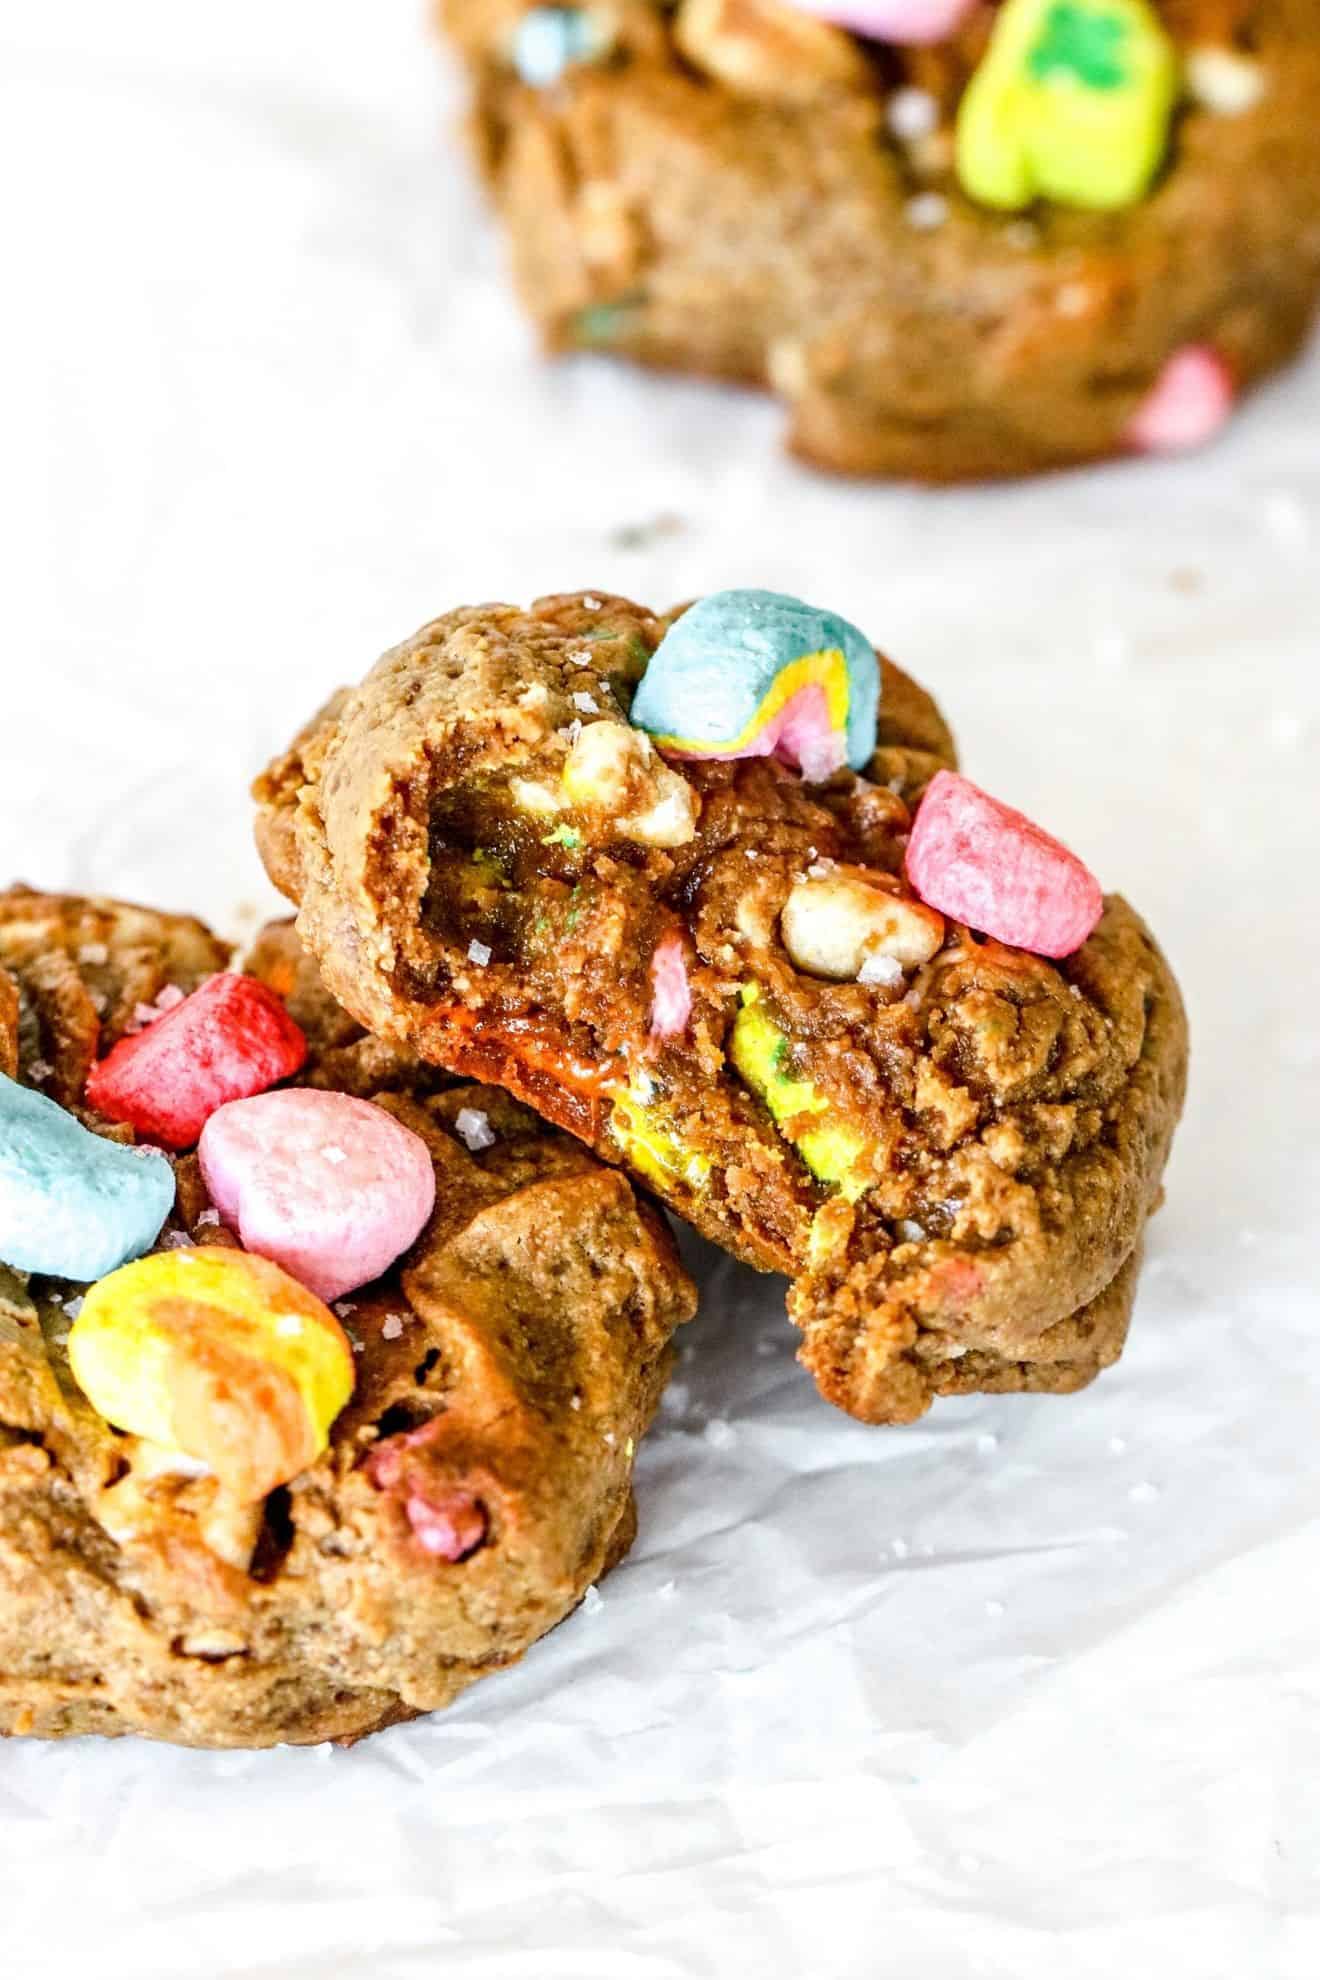 This is a side view image of a peanut butter cookie with a bite taken out of it. The cookie is topped with colorful marshmallows and leaning against another cookie. The cookies sit on a white piece of parchment paper. Another cookie is blurred in the right top corner of the image.